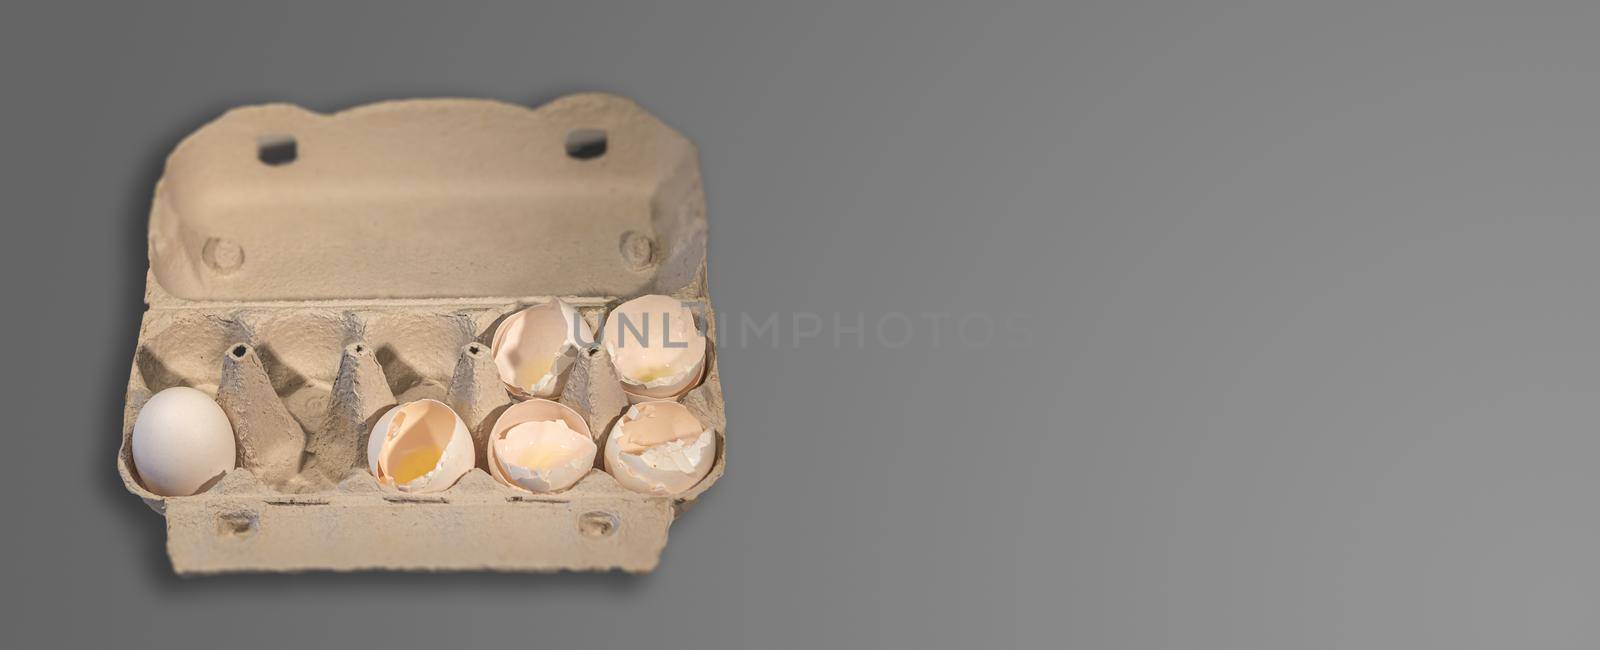 Banner with eggs packaging carton box with 5 broken chicken eggs and one not, Design concept for uncertainty, fate, fear, cruelty of life, unavoidable sacrifices. by neurobite